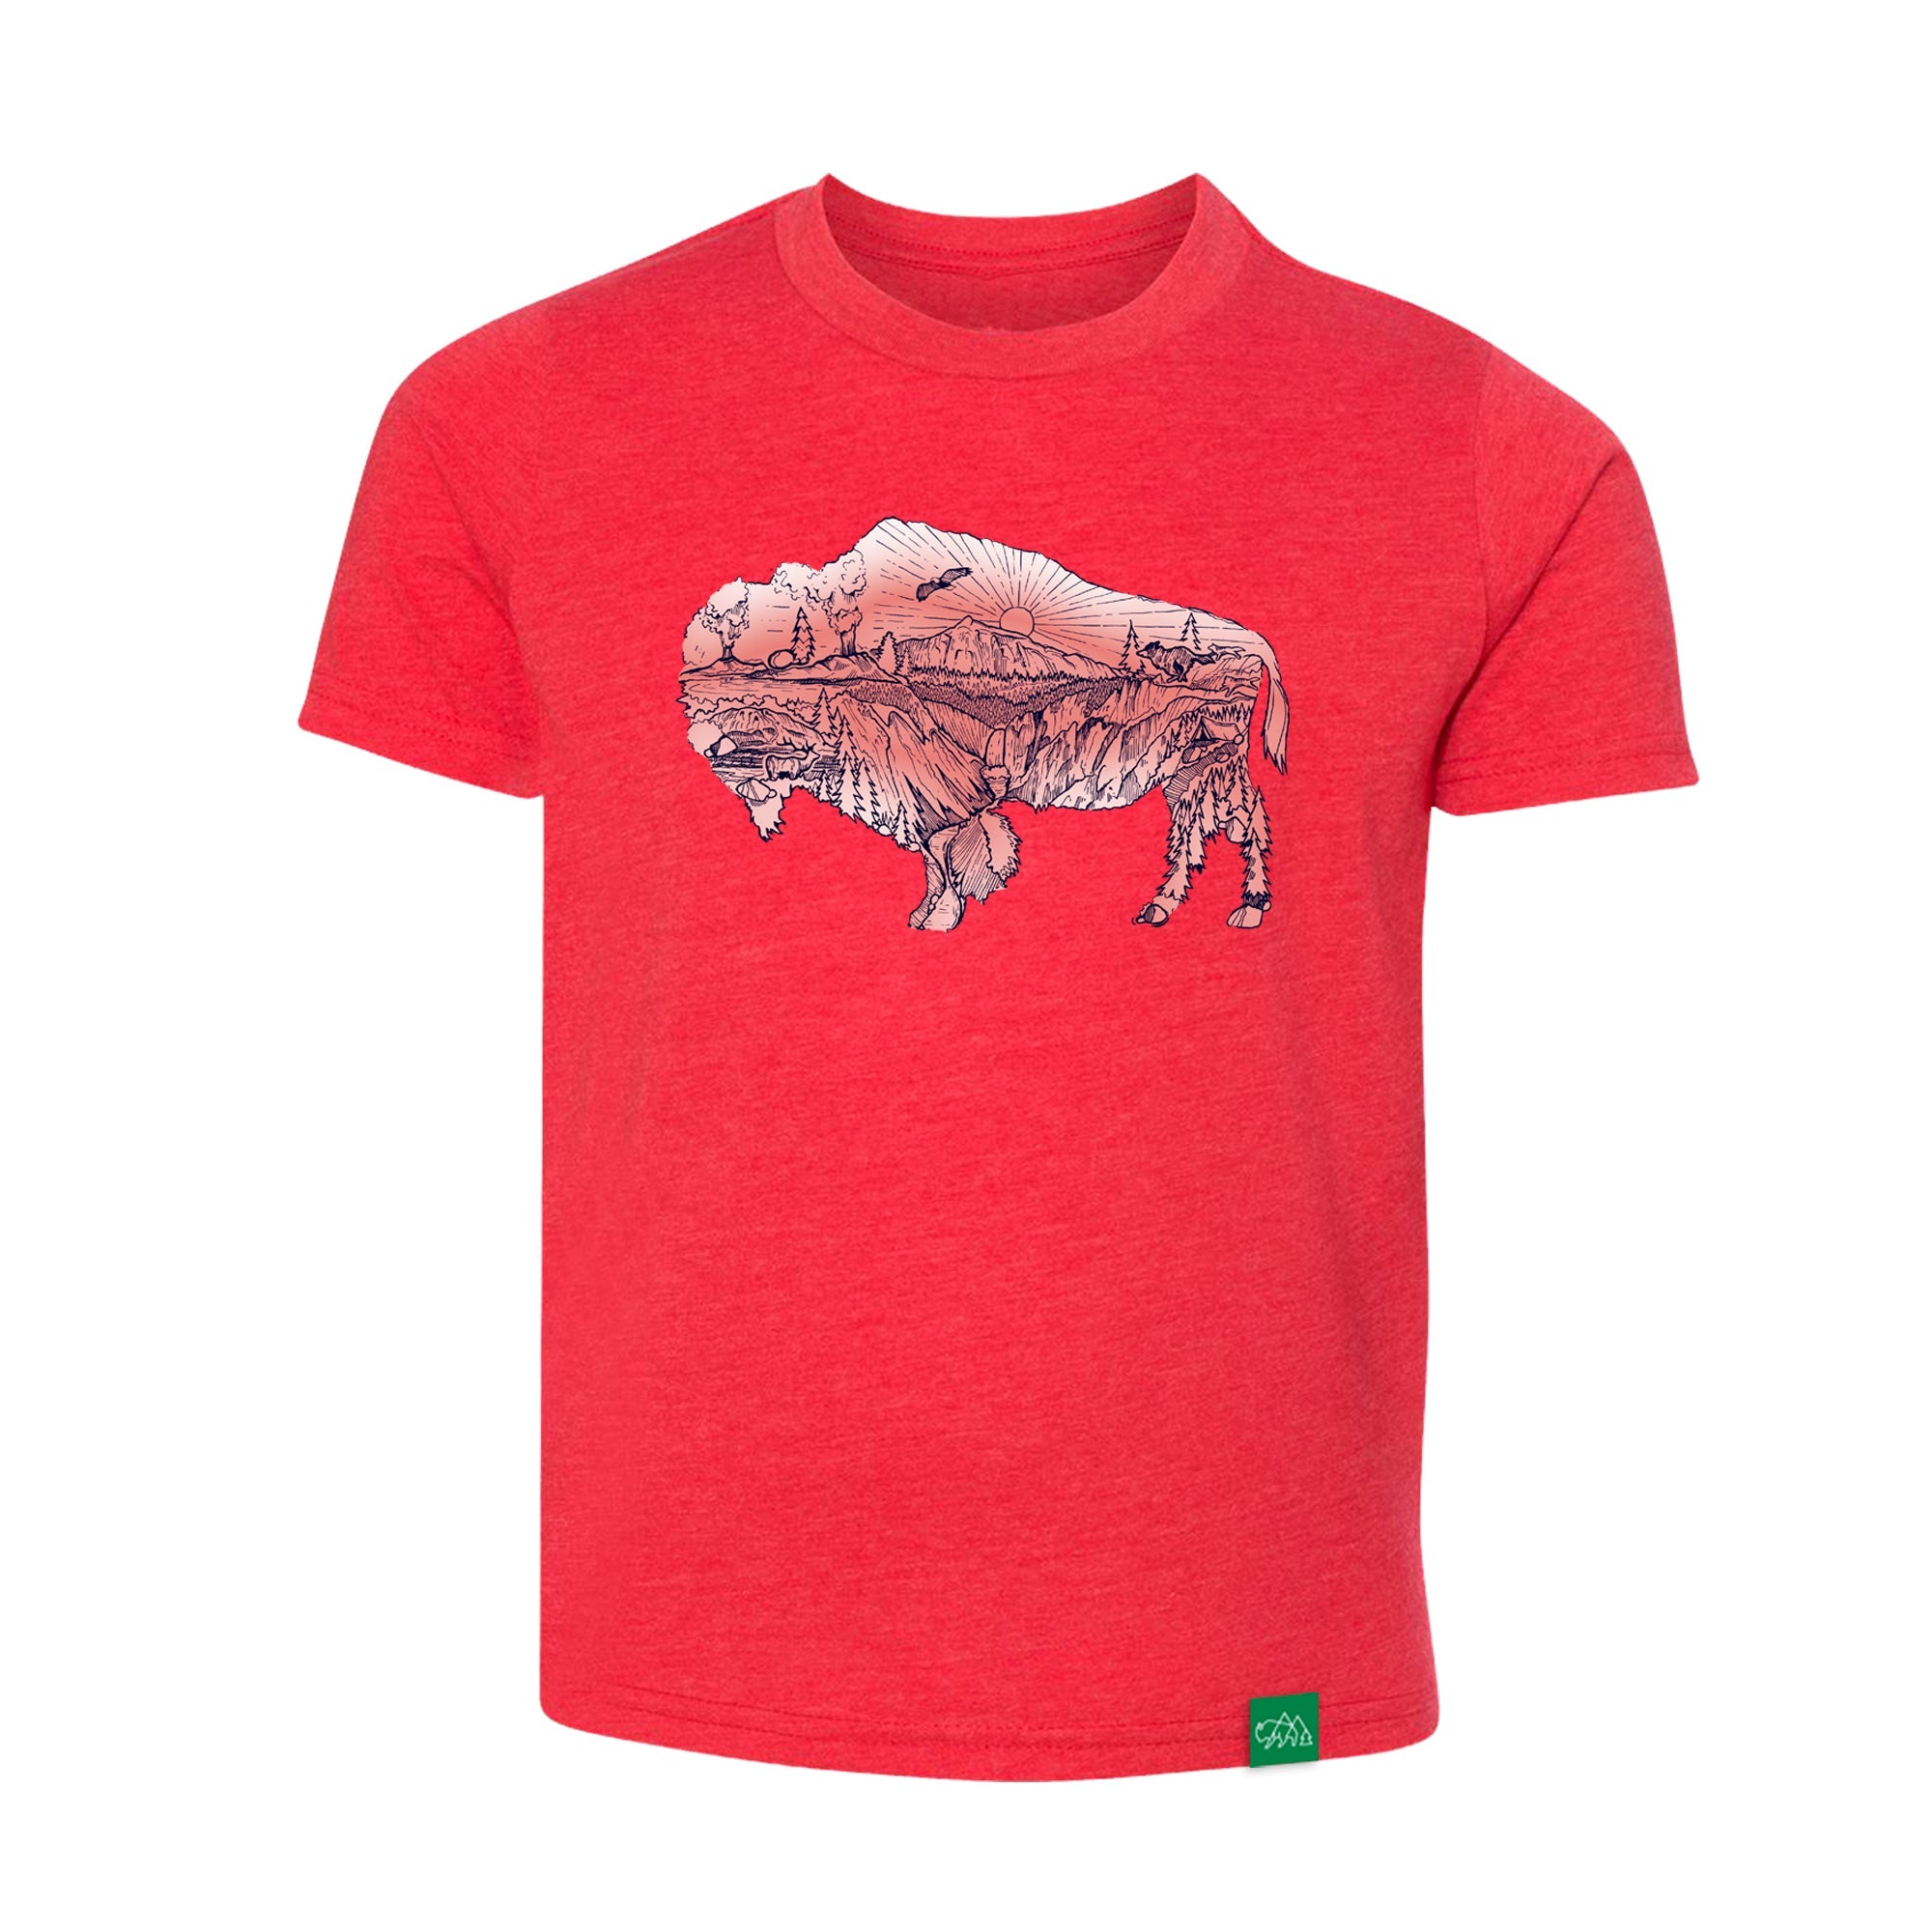 Yellowstone National Park Bison Youth T-Shirt